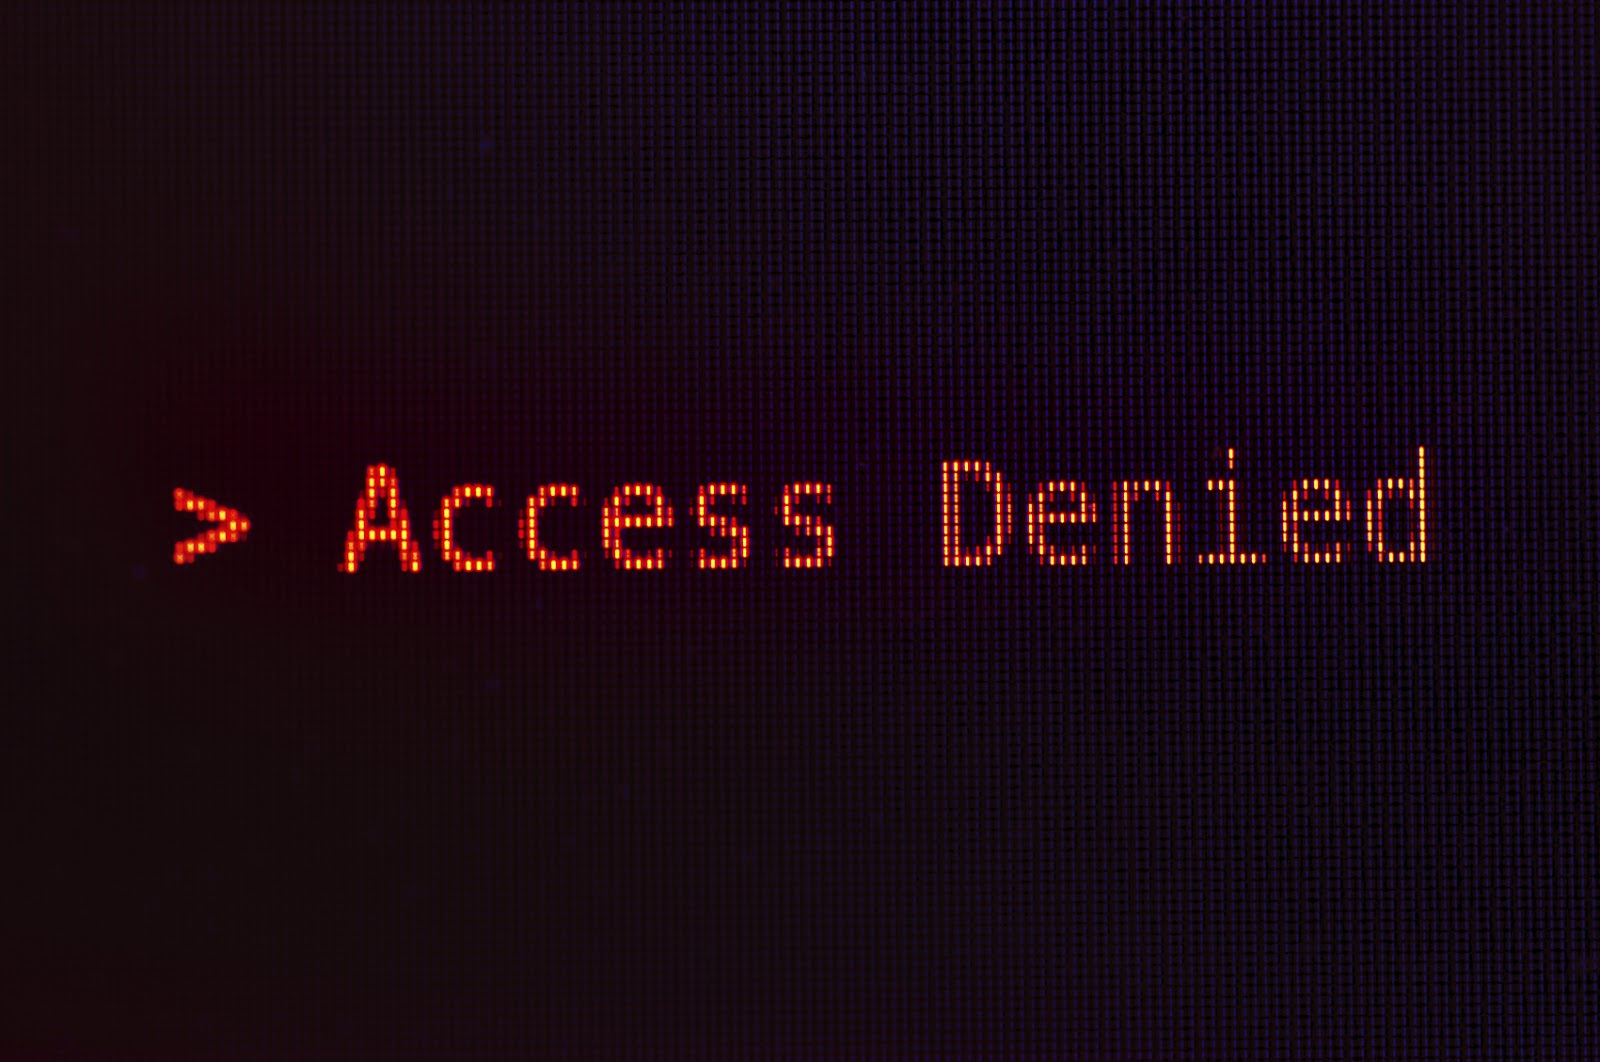 access denied for reasons of national security free pdf download